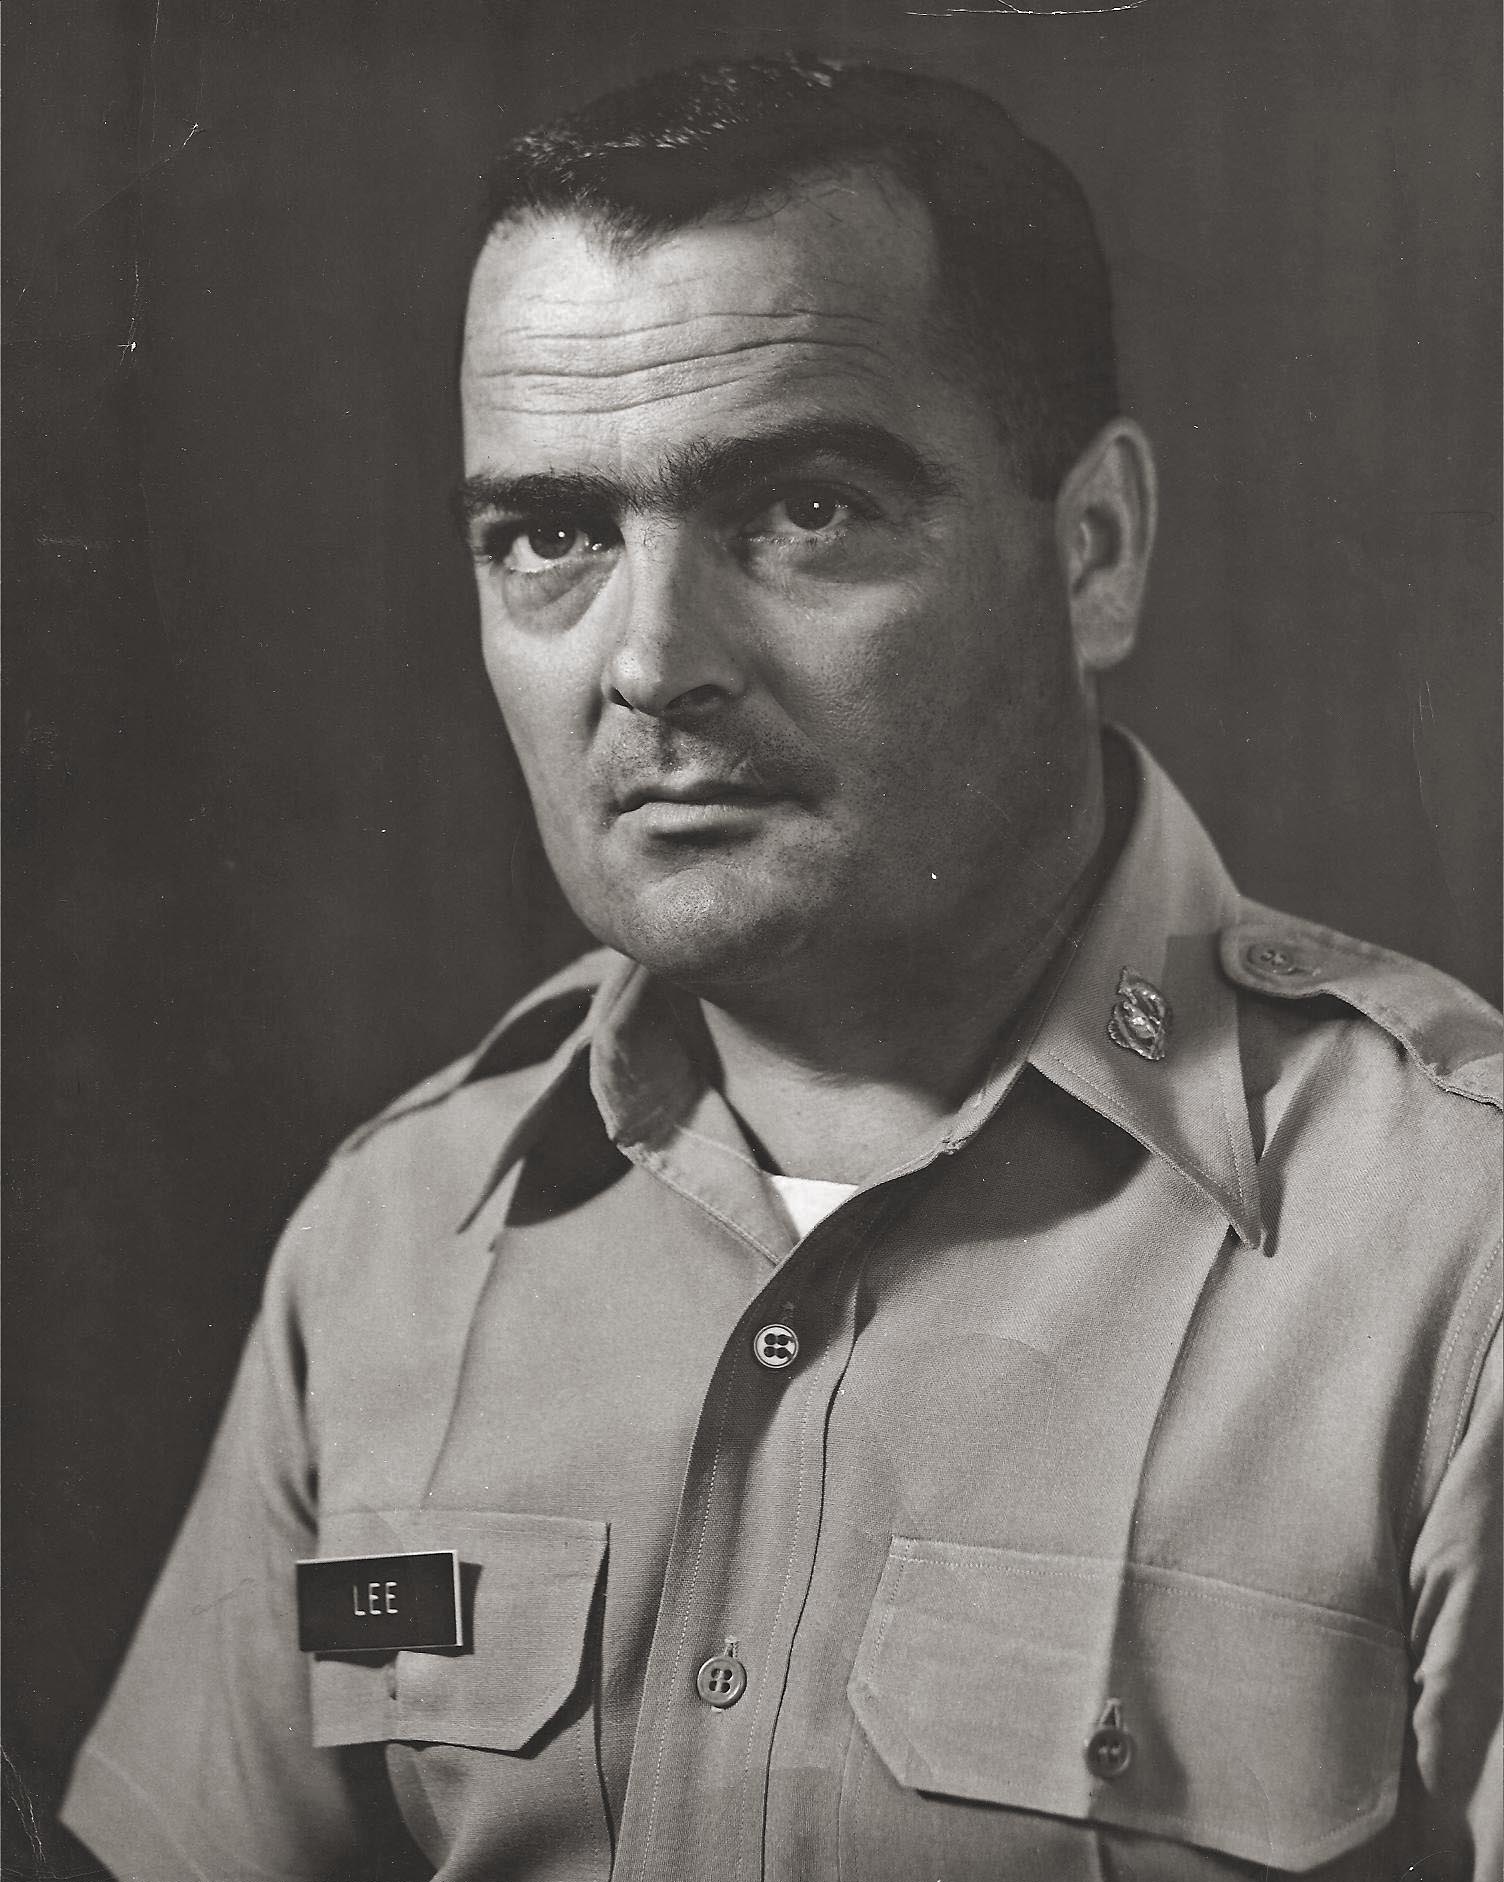 My father, Chief Warrant Officer Don Lee. This was taken at Schofield Barracks, Hawaii in 1964. He did a tour of duty in Vietnam from 1969 to 1970. He died in 1997.